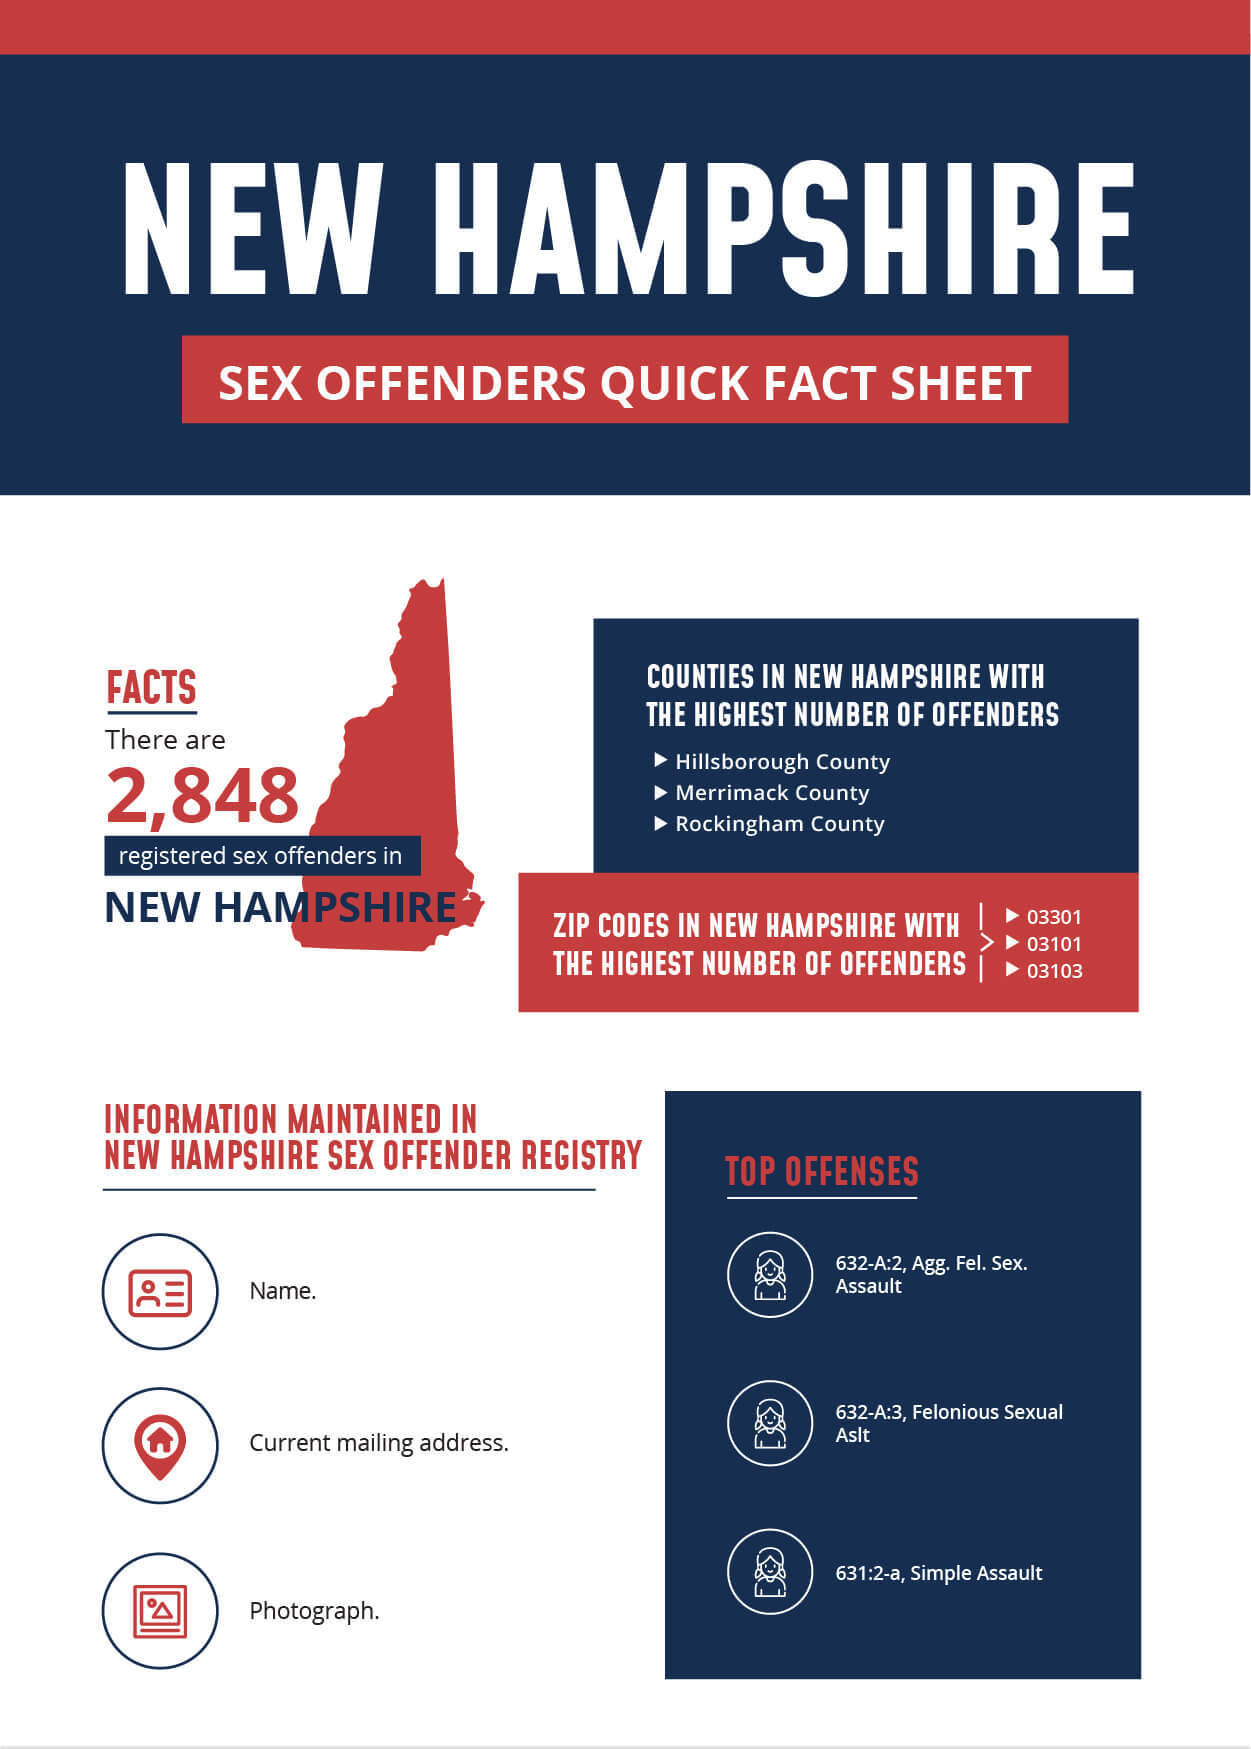 New hampshire sex offender laws